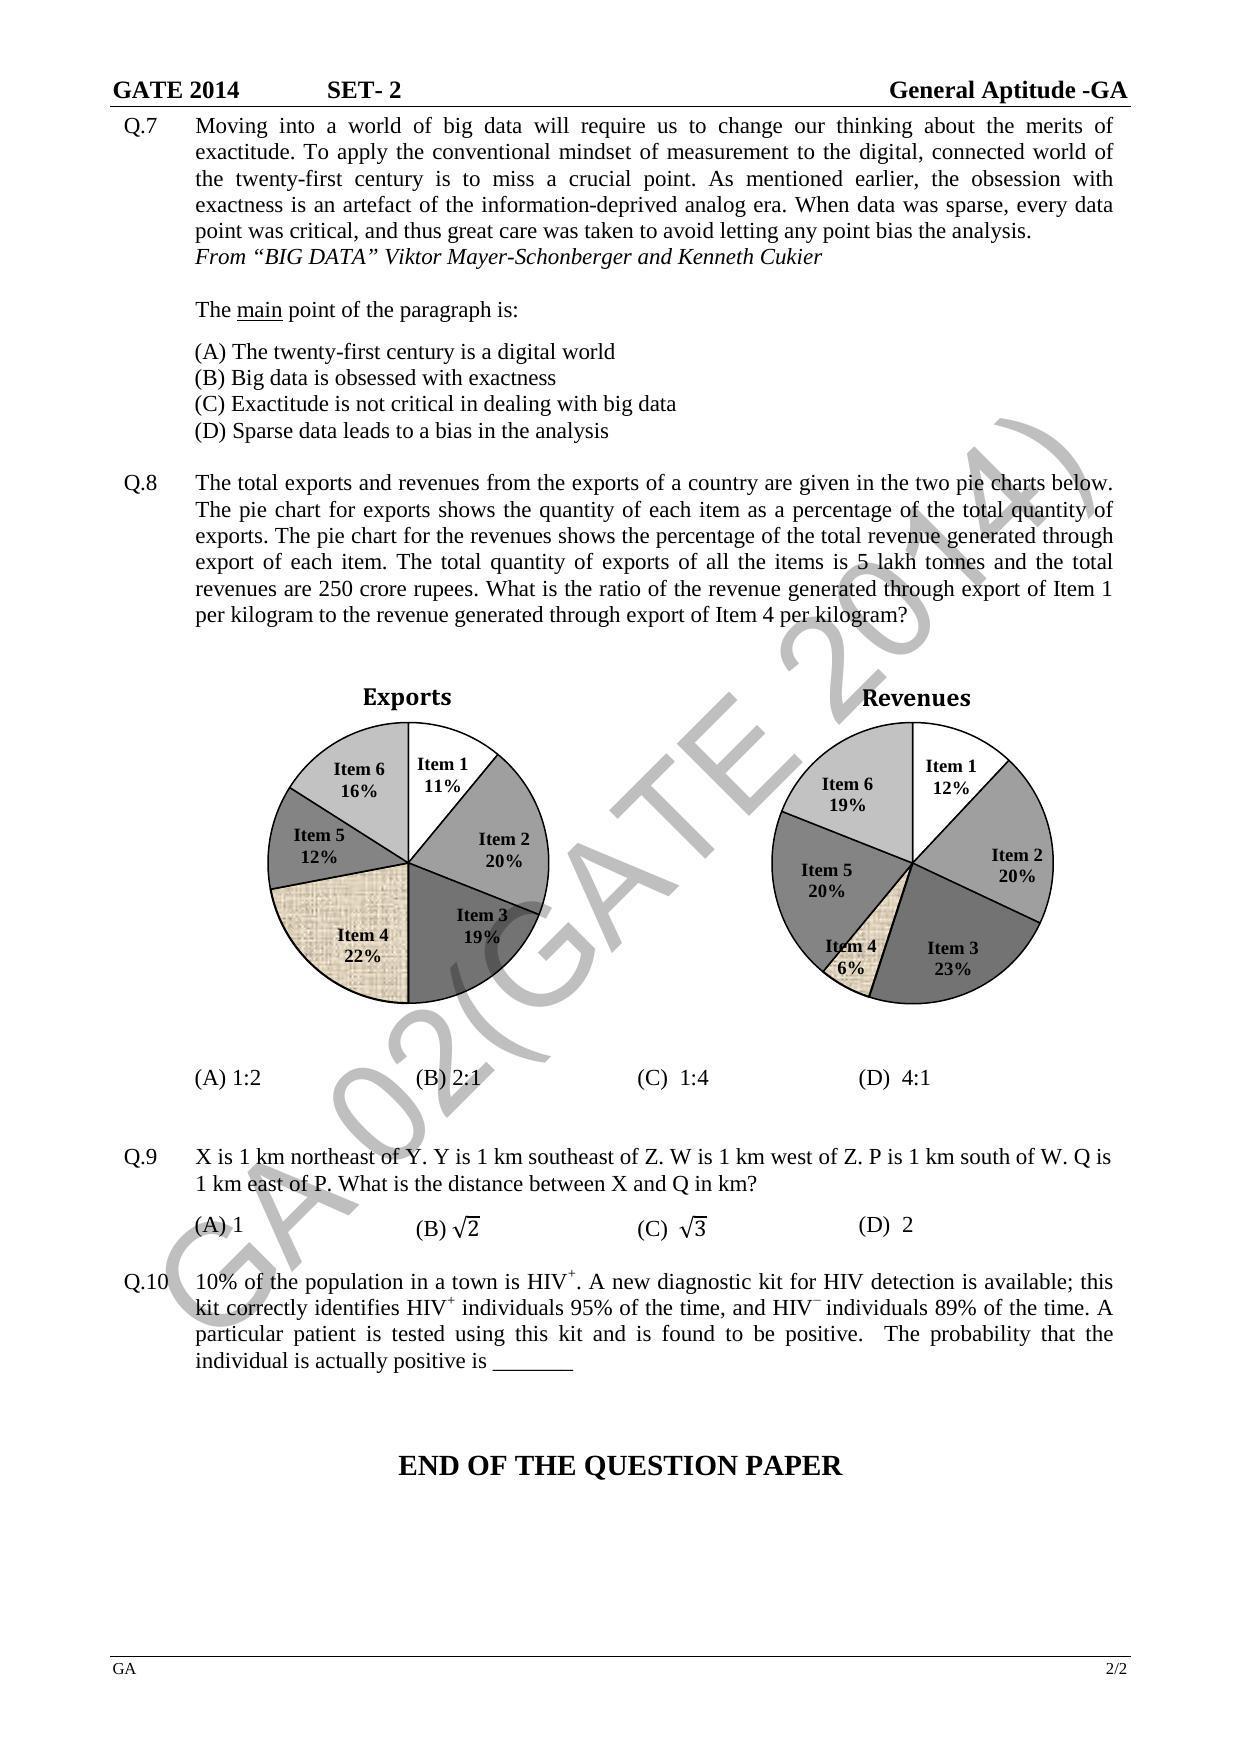 GATE 2014 Civil Engineering (CE) Question Paper with Answer Key - Page 28